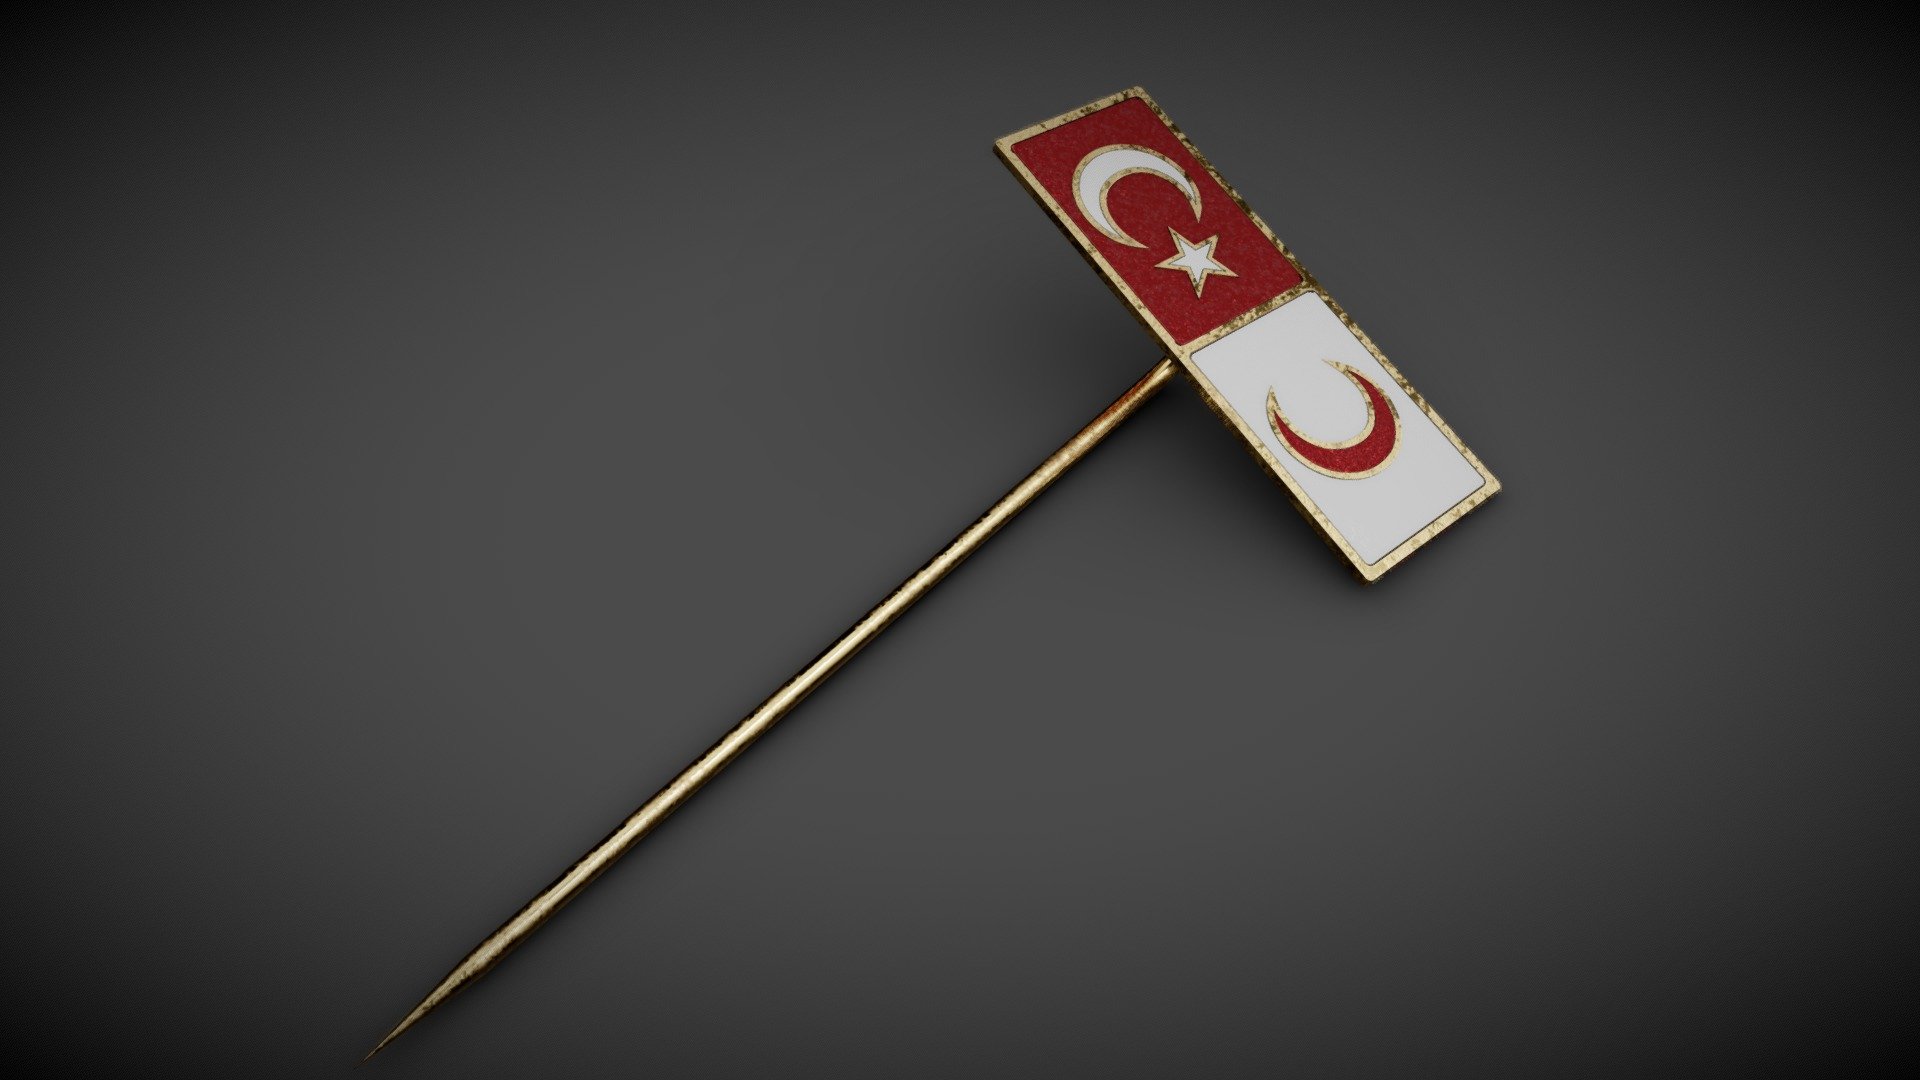 First use of Red Crescent as an emblem